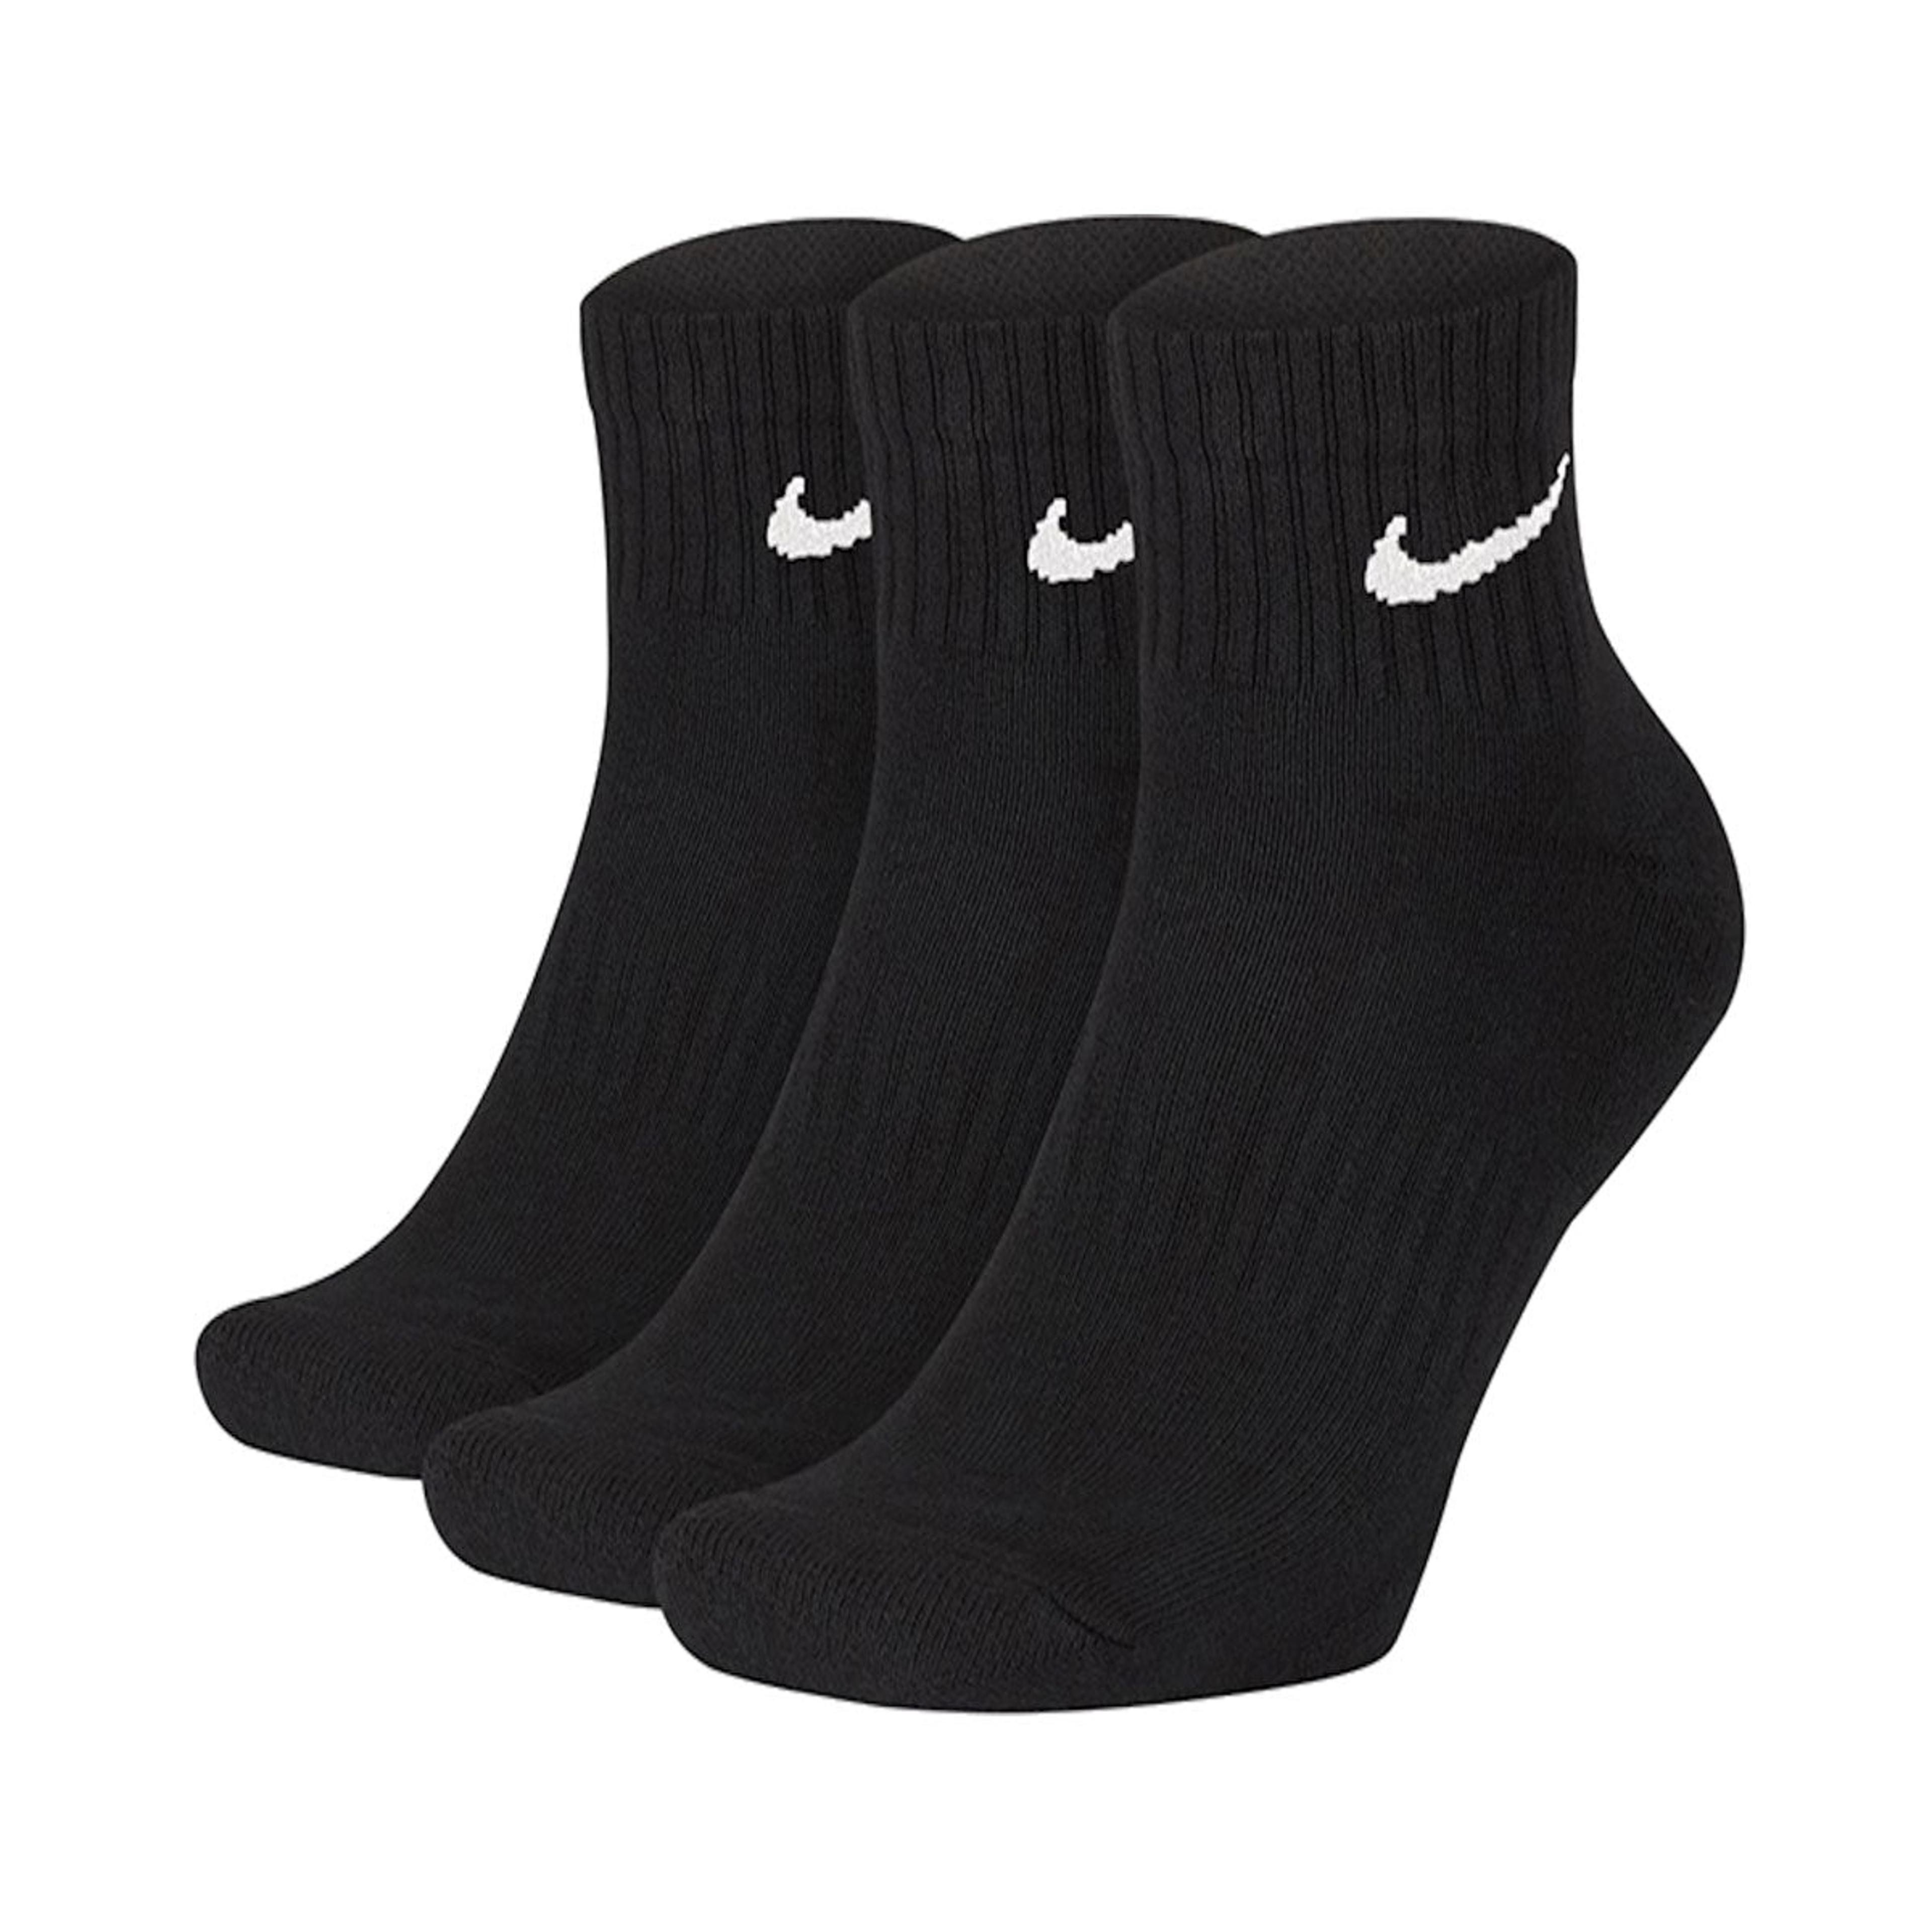 Alternate View 3 of Nike Cushioned Training Ankle Socks (3pairs)